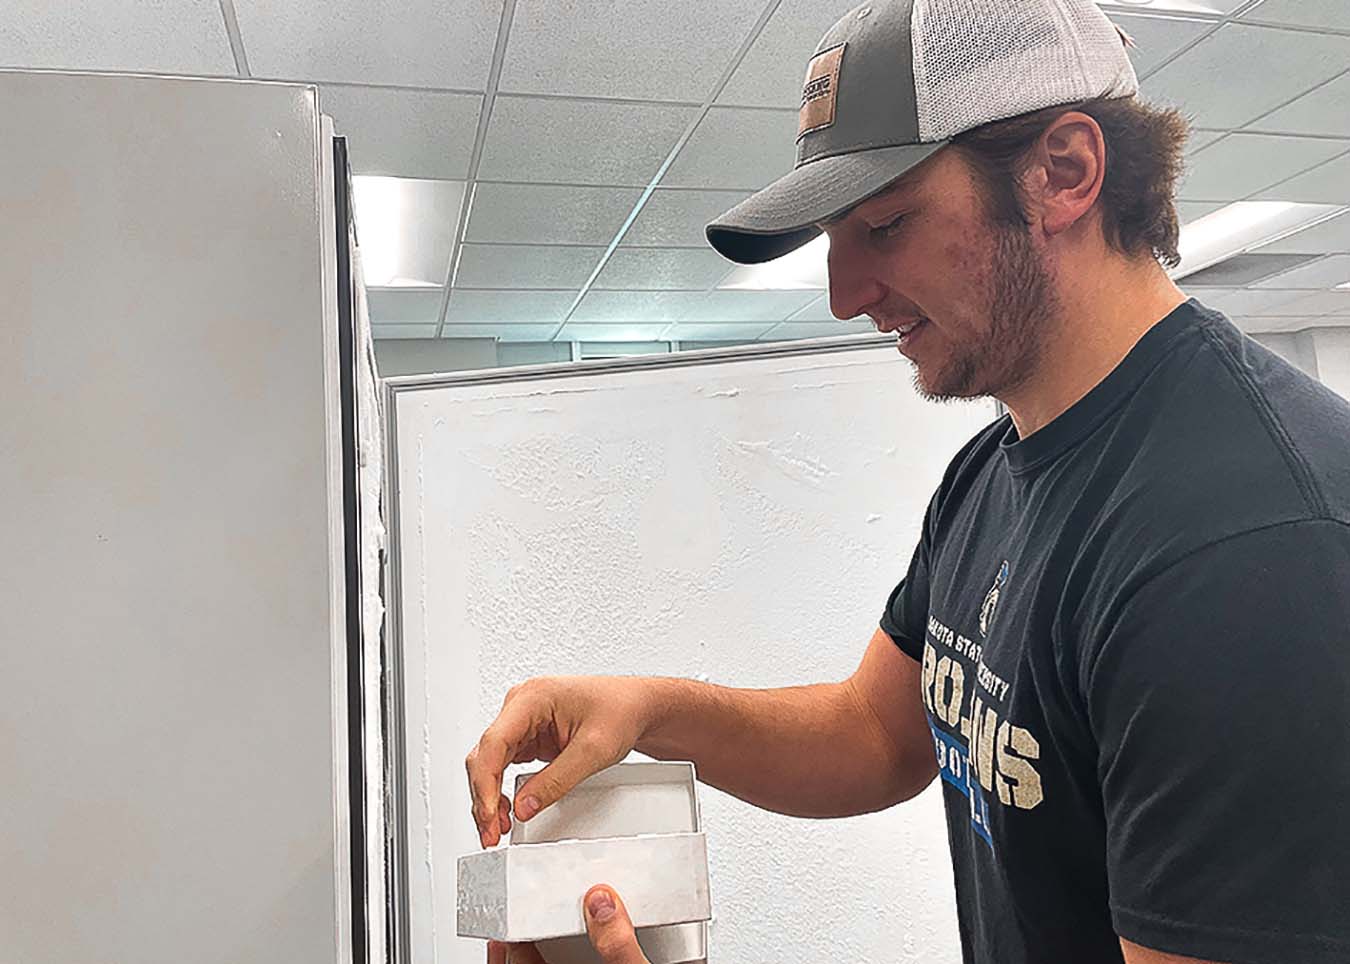 Tordsen removes a sample from the lab freezer.